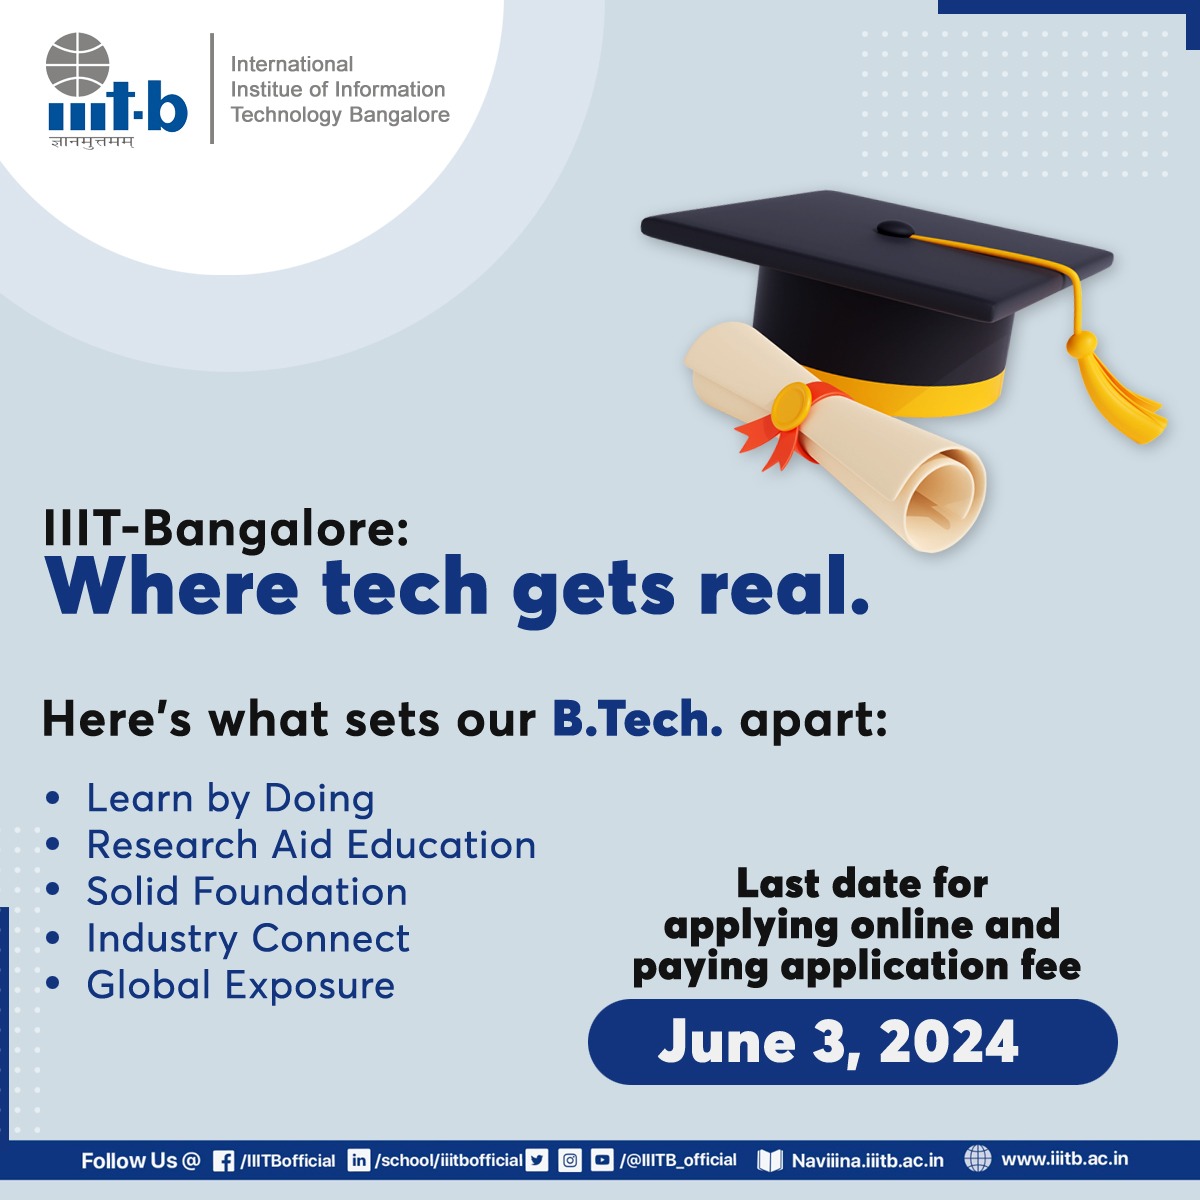 IIIT-Bangalore: Where tech gets real. Here's what sets our B.Tech apart: Learn by Doing Research Aid Education Solid Foundation for Success Industry Connect Global Exposure Apply Now: iiitb.ac.in/courses/btech-… #IIITB #IIITBangalore #AdmissionsOpen #BTech